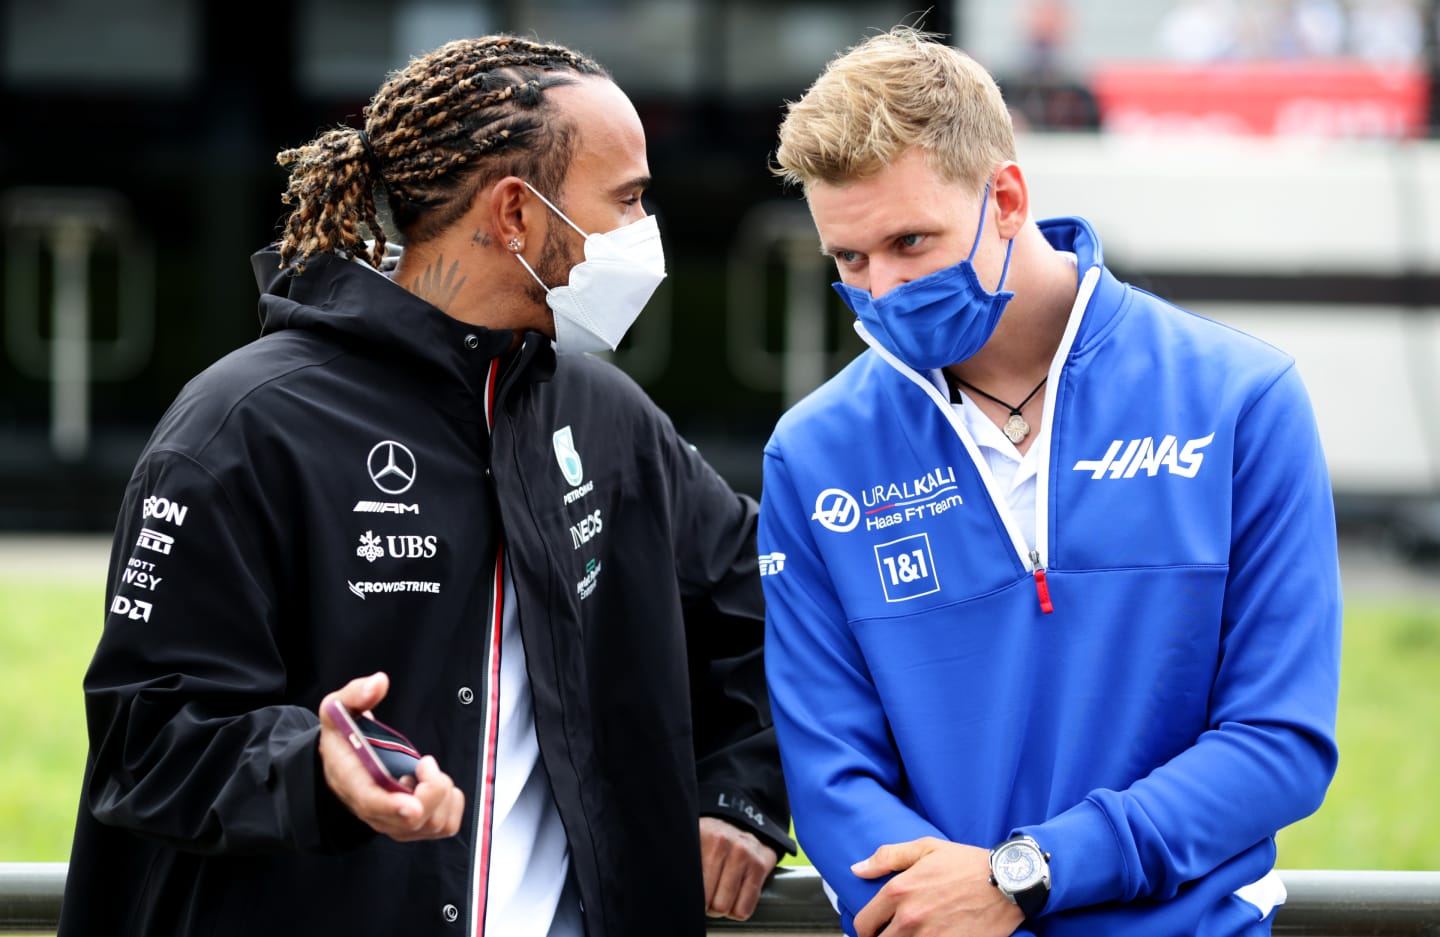 LE CASTELLET, FRANCE - JUNE 20: Lewis Hamilton of Great Britain and Mercedes GP talks with Mick Schumacher of Germany and Haas F1 during the F1 Grand Prix of France at Circuit Paul Ricard on June 20, 2021 in Le Castellet, France. (Photo by Peter Fox/Getty Images)